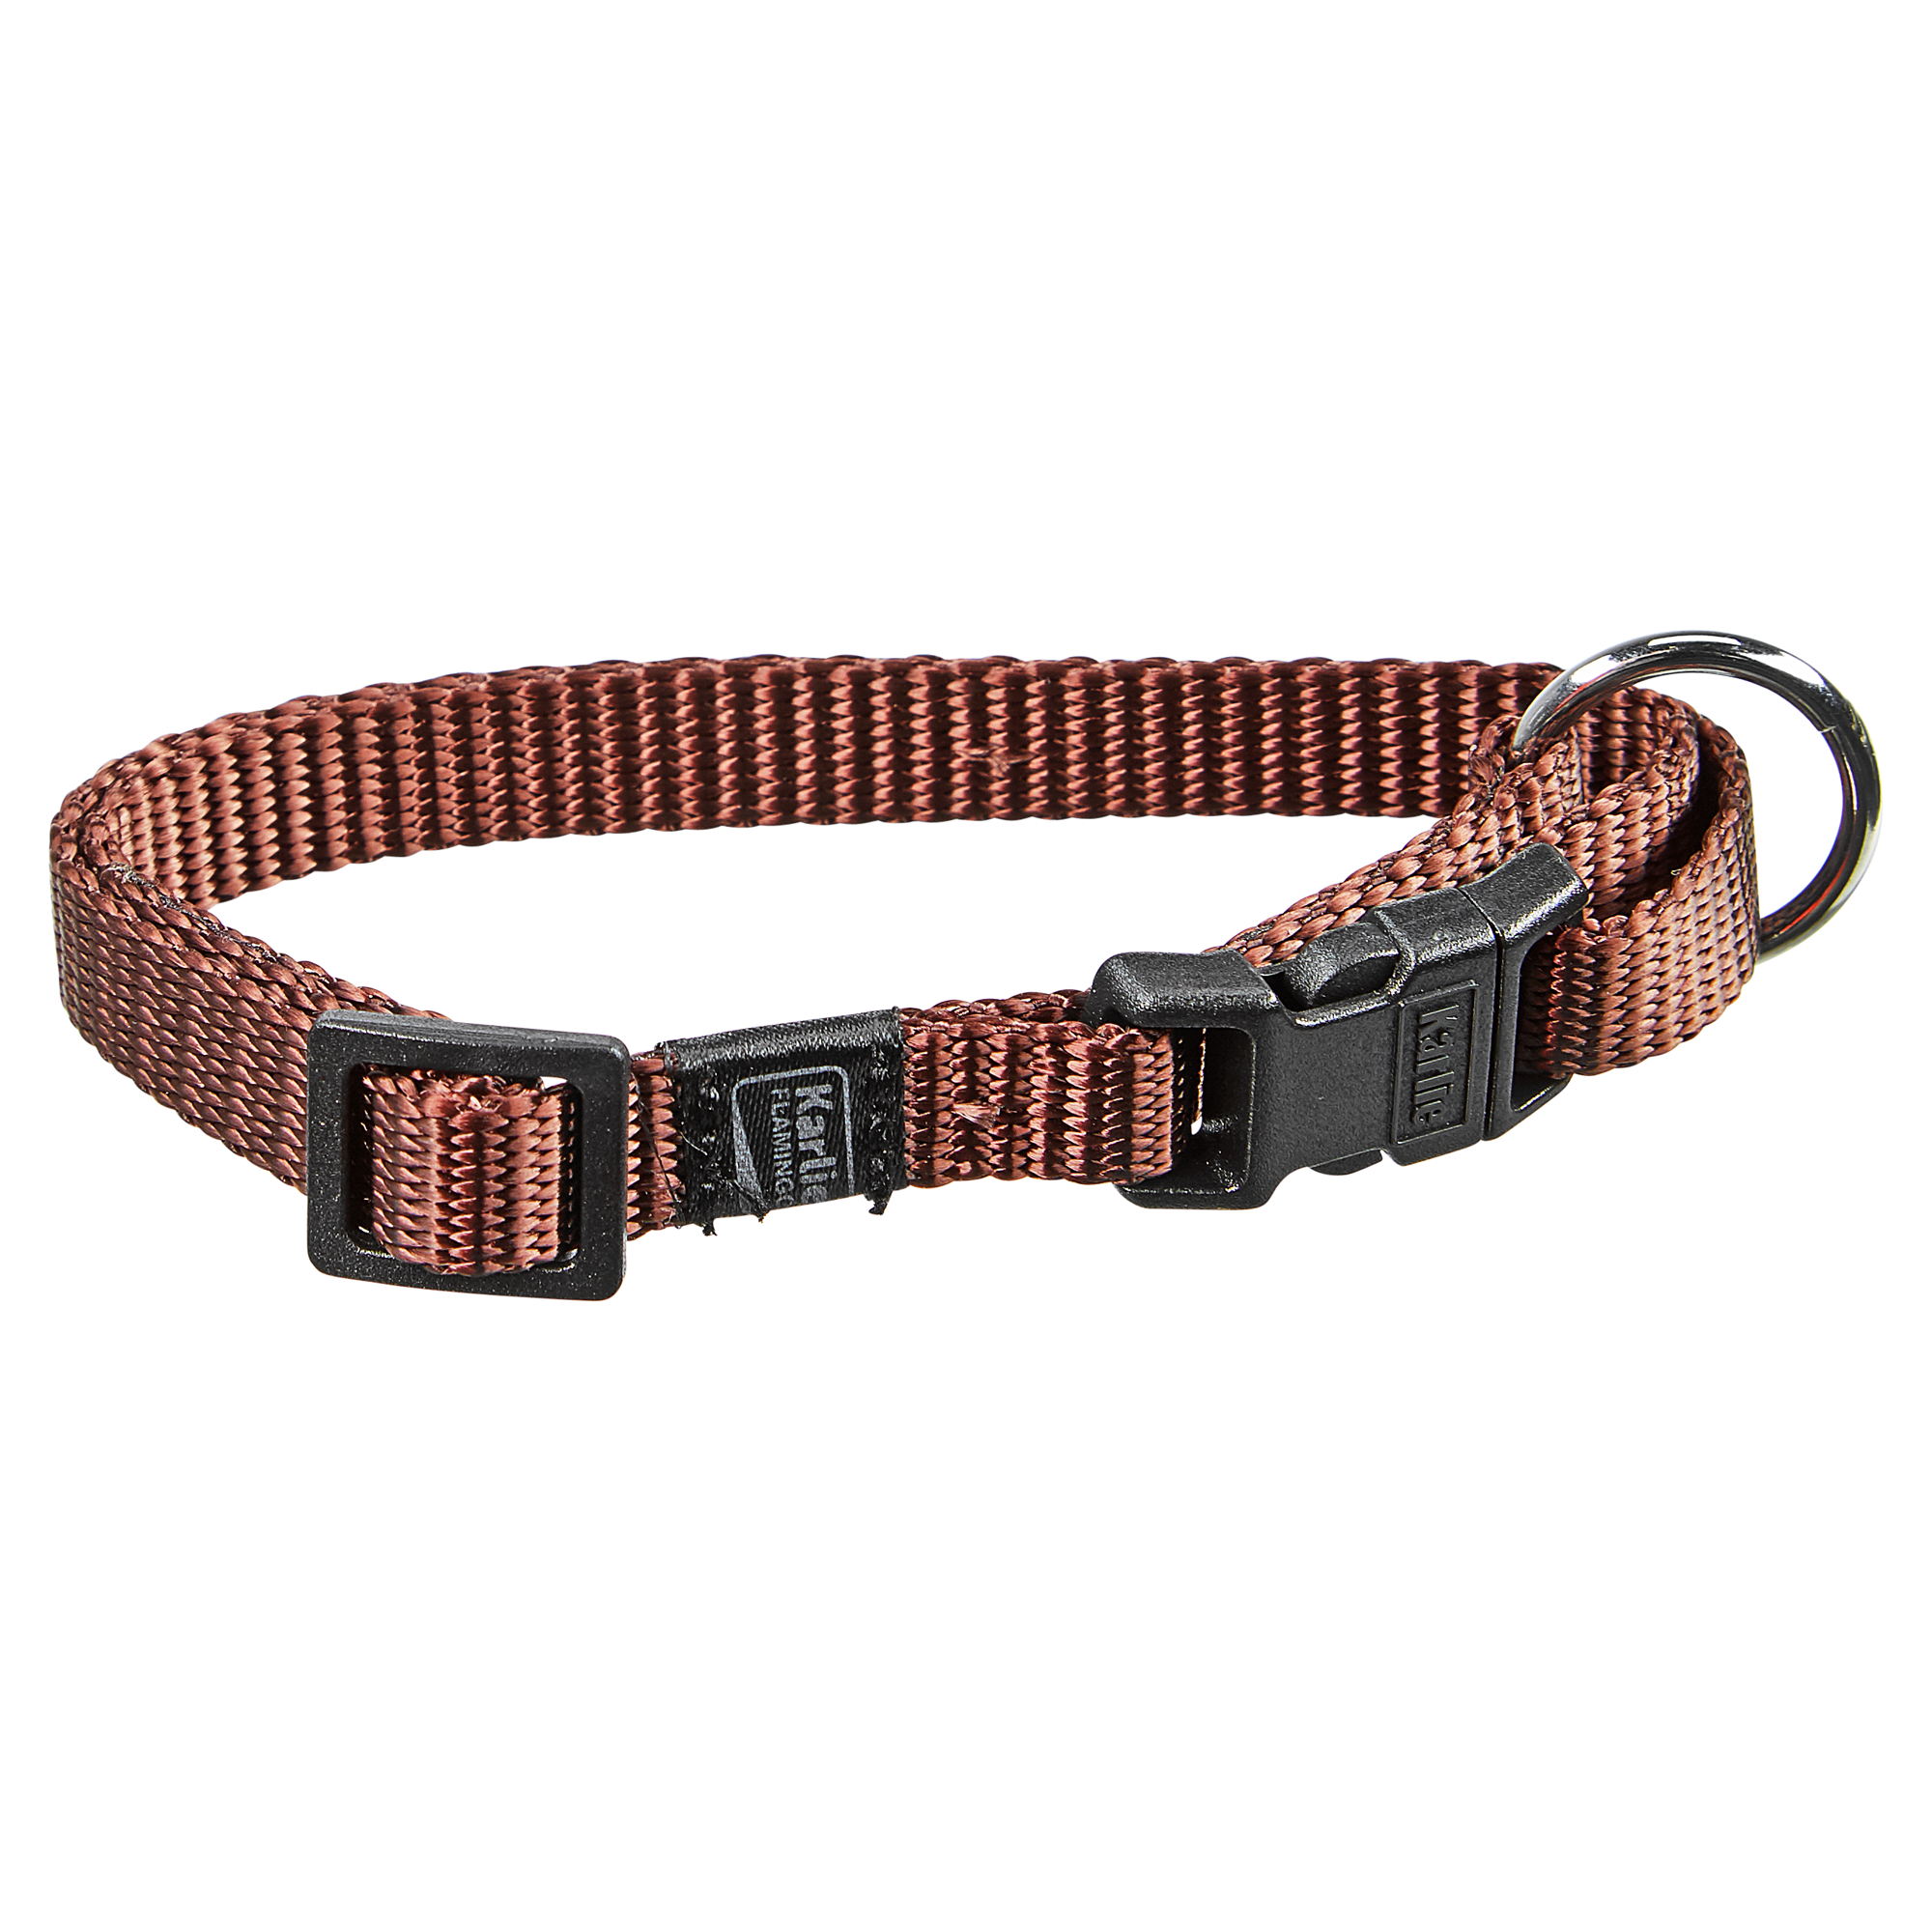 Hundehalsband braun 20 - 35 x 1 cm + product picture